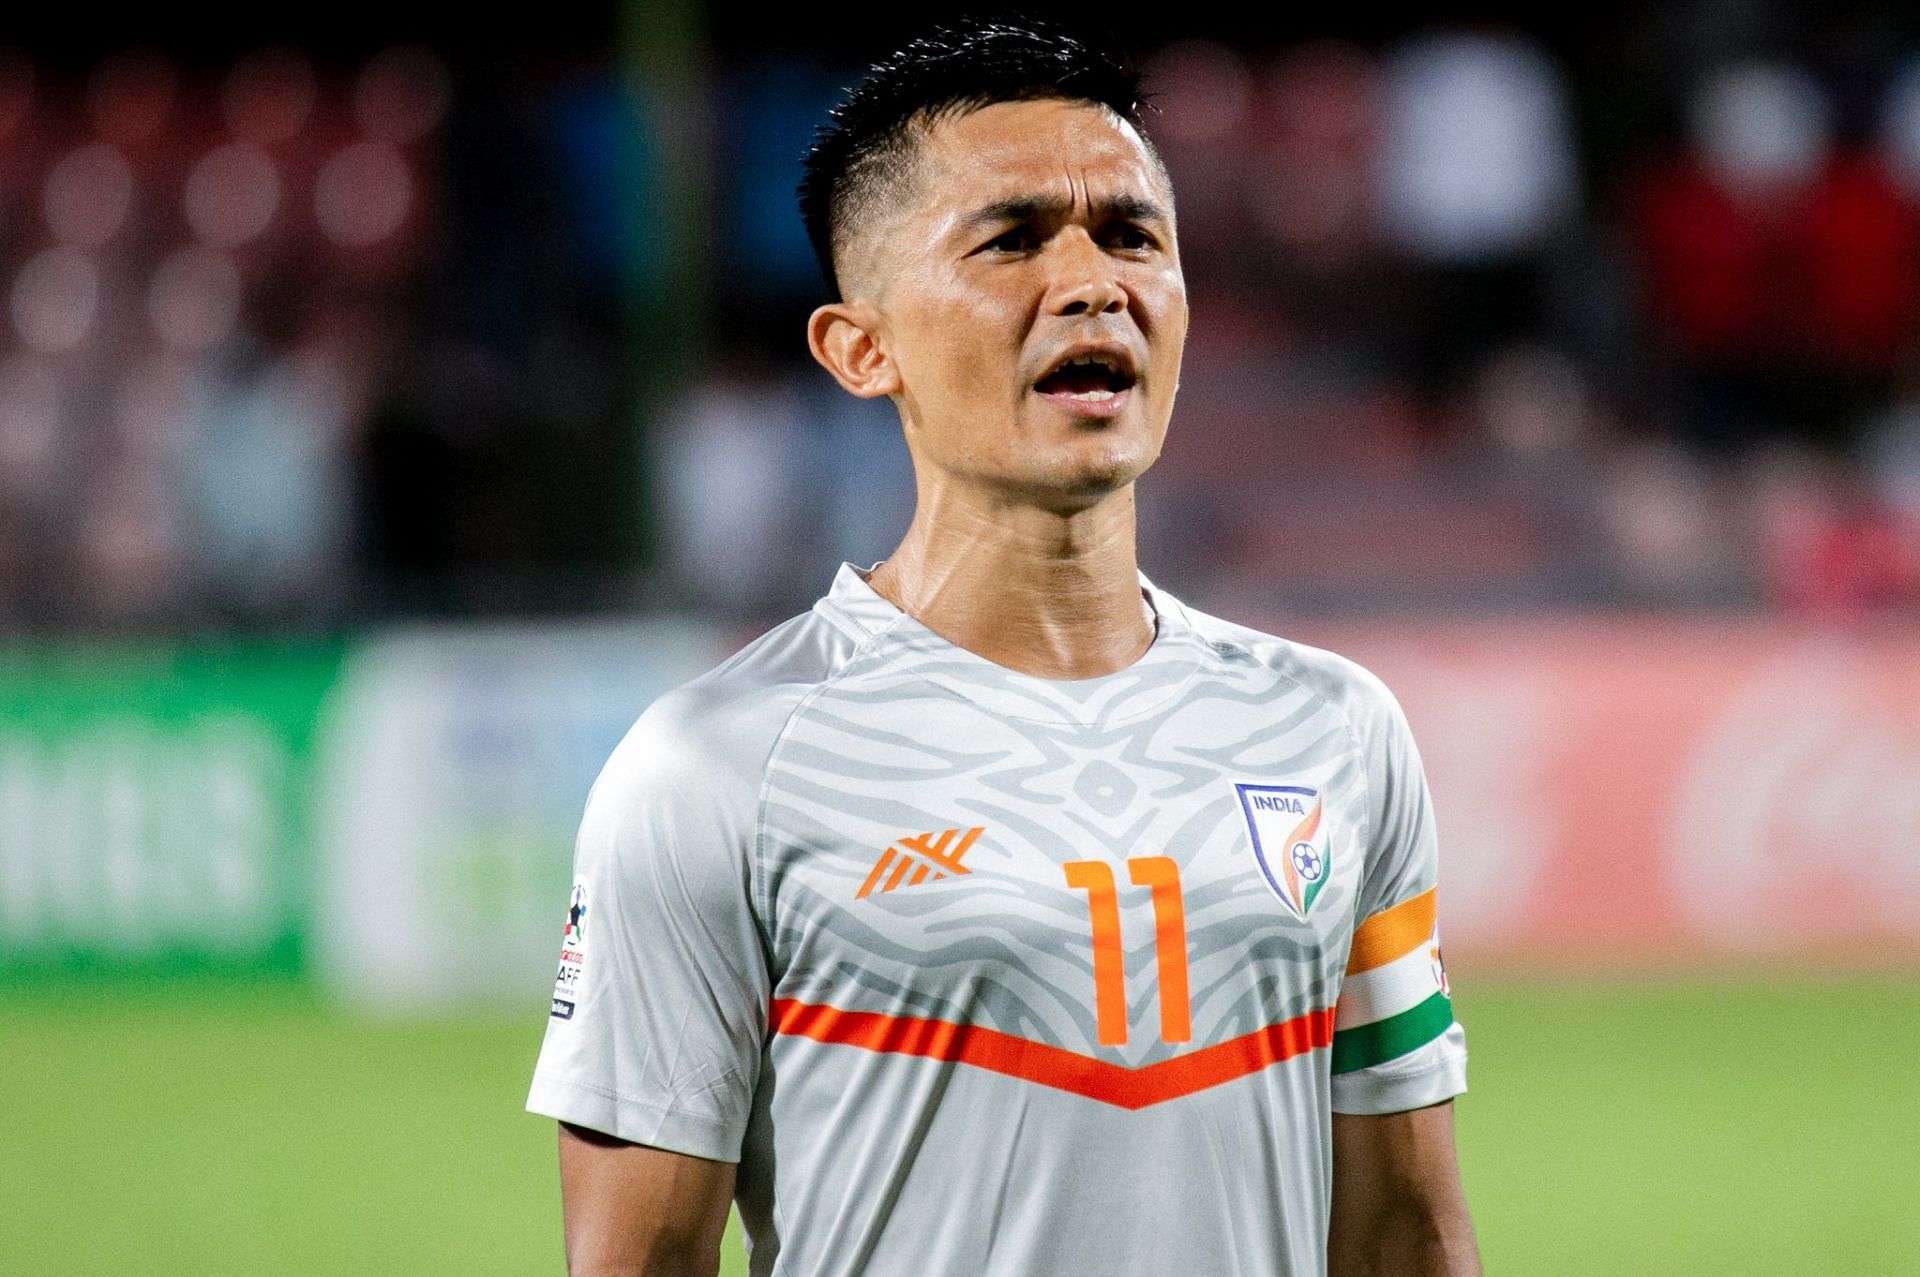 Sunil Chhetri took to Twitter to condemn the treatment meted out to the protesting wrestlers.